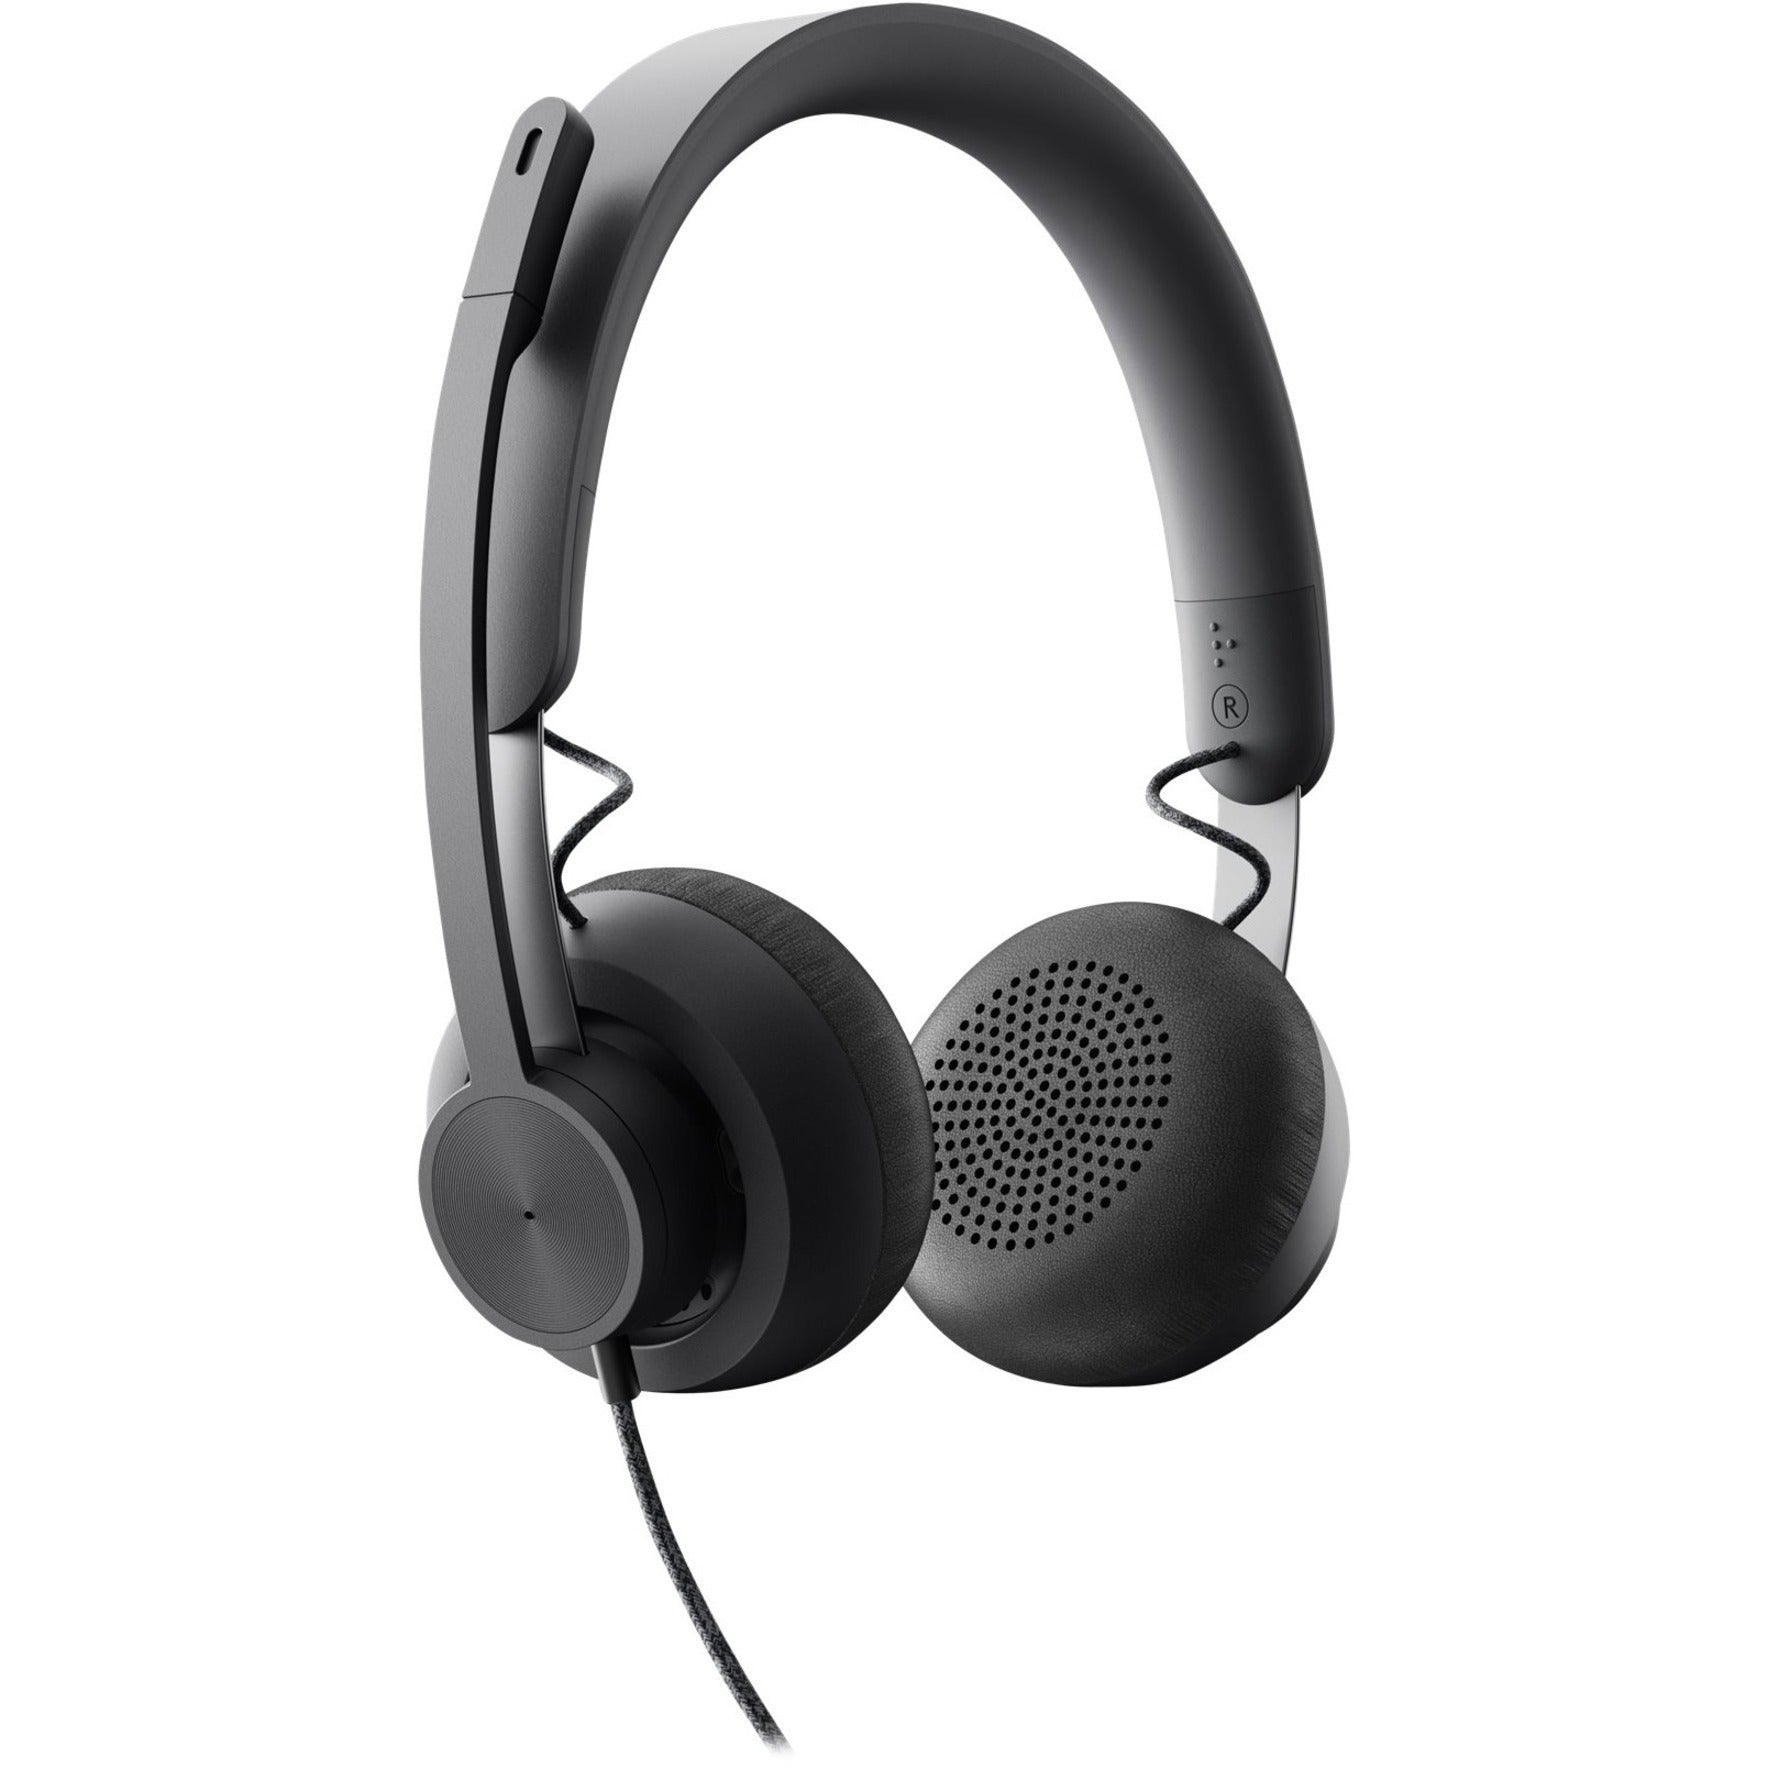 Logitech 981-000876 Zone Headset, USB Type C, 2 Year Warranty, Comfortable and Tangle-free Cable